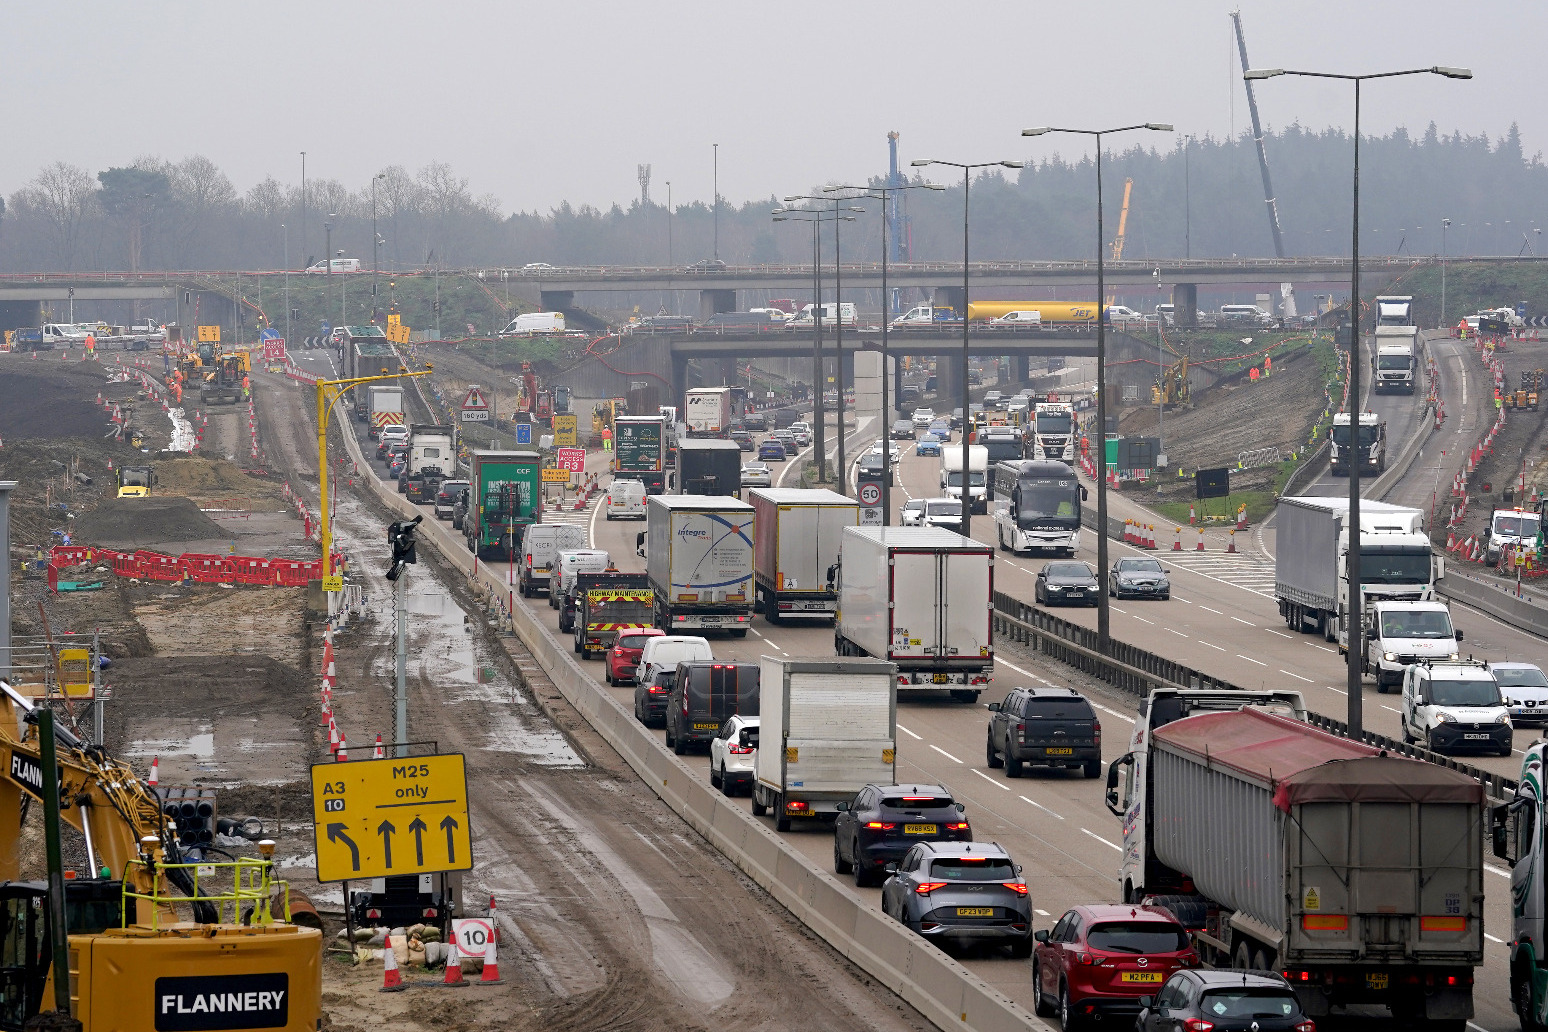 Fears raised over ‘gridlock’ this weekend on M25 